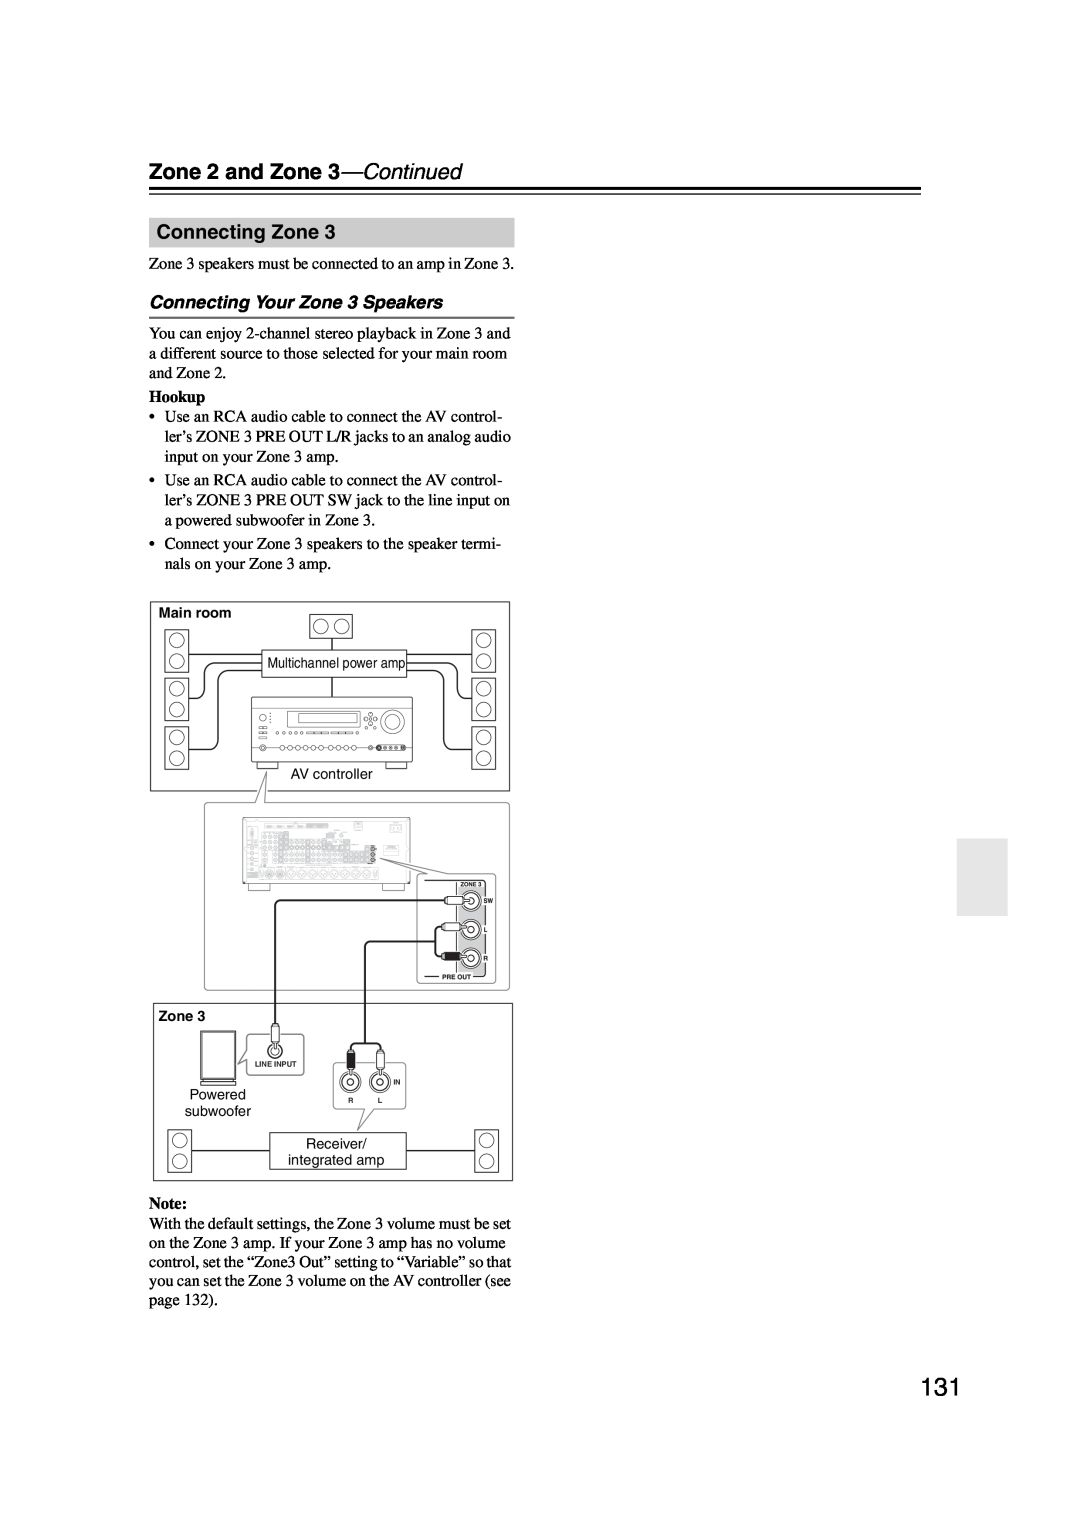 Integra DHC-9.9 instruction manual Zone 2 and Zone 3—Continued, Connecting Your Zone 3 Speakers, Connecting Zone, Hookup 